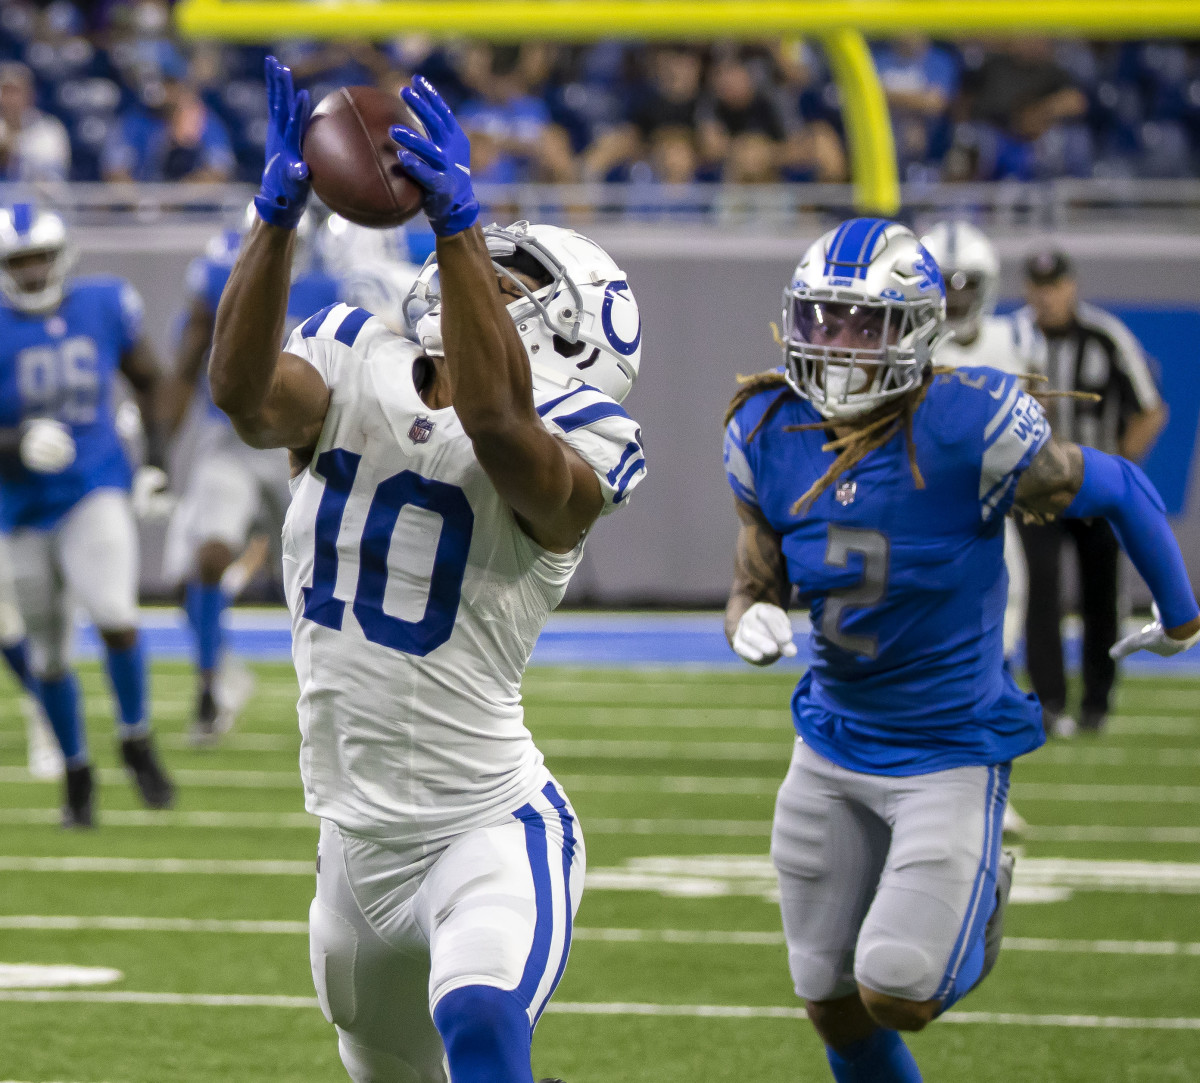 Aug 27, 2021; Detroit, Michigan, USA; Indianapolis Colts wide receiver Dezmon Patmon (10) makes a catch in front of Detroit Lions defensive back Mike Ford (2) in the second quarter at Ford Field.